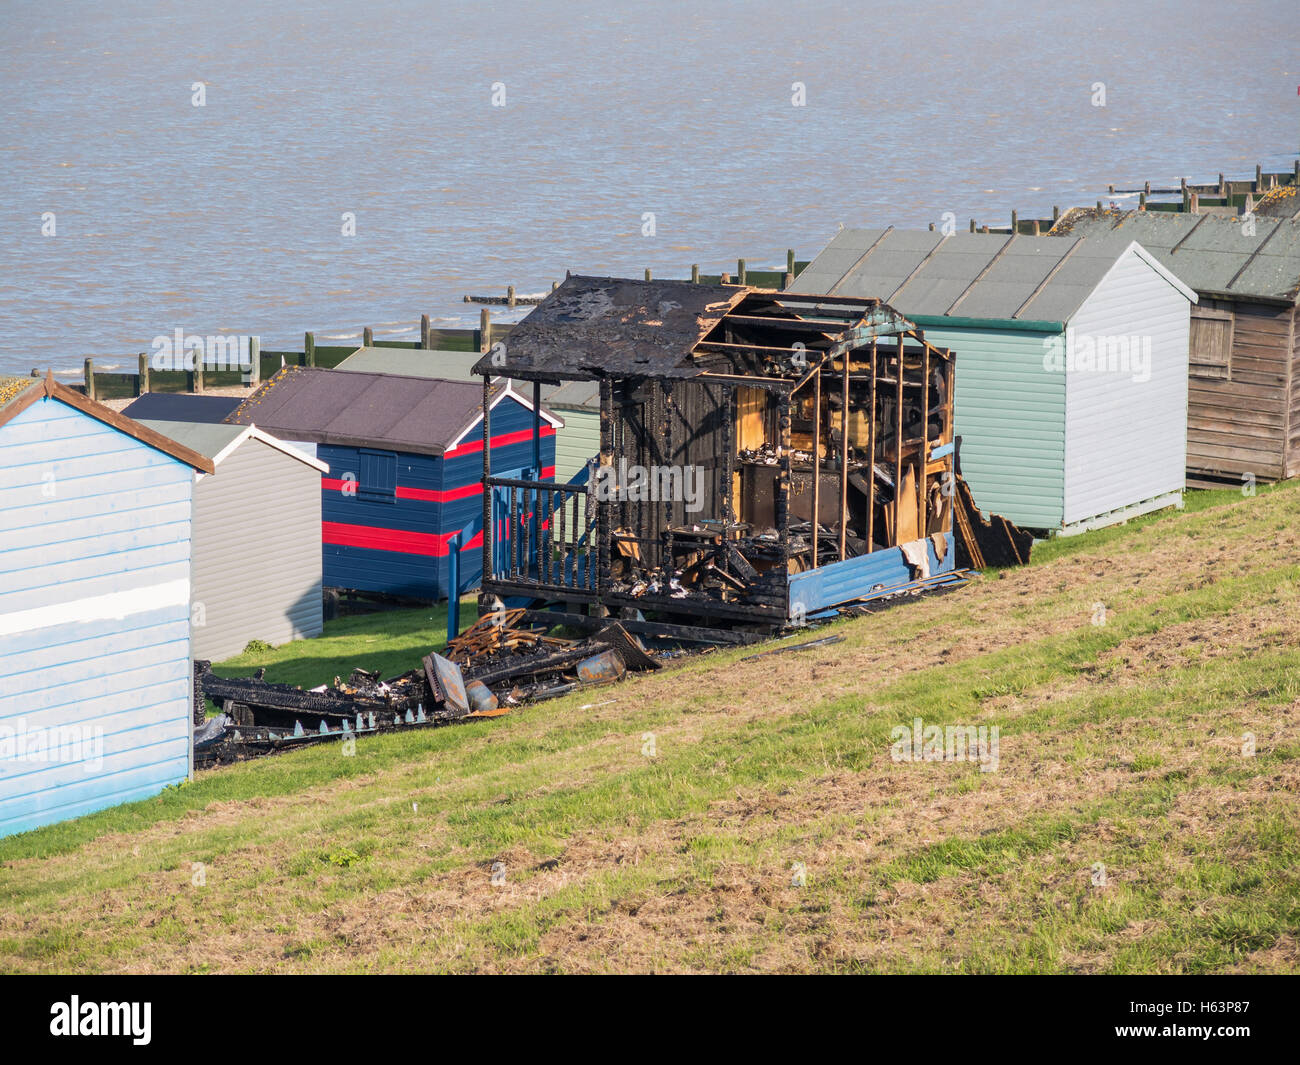 WHITSTABLE, UK - OCT 23 2016.  Two beach huts burnt out along Tankerton seafront, Whitstable. Local press report that arson is t Stock Photo